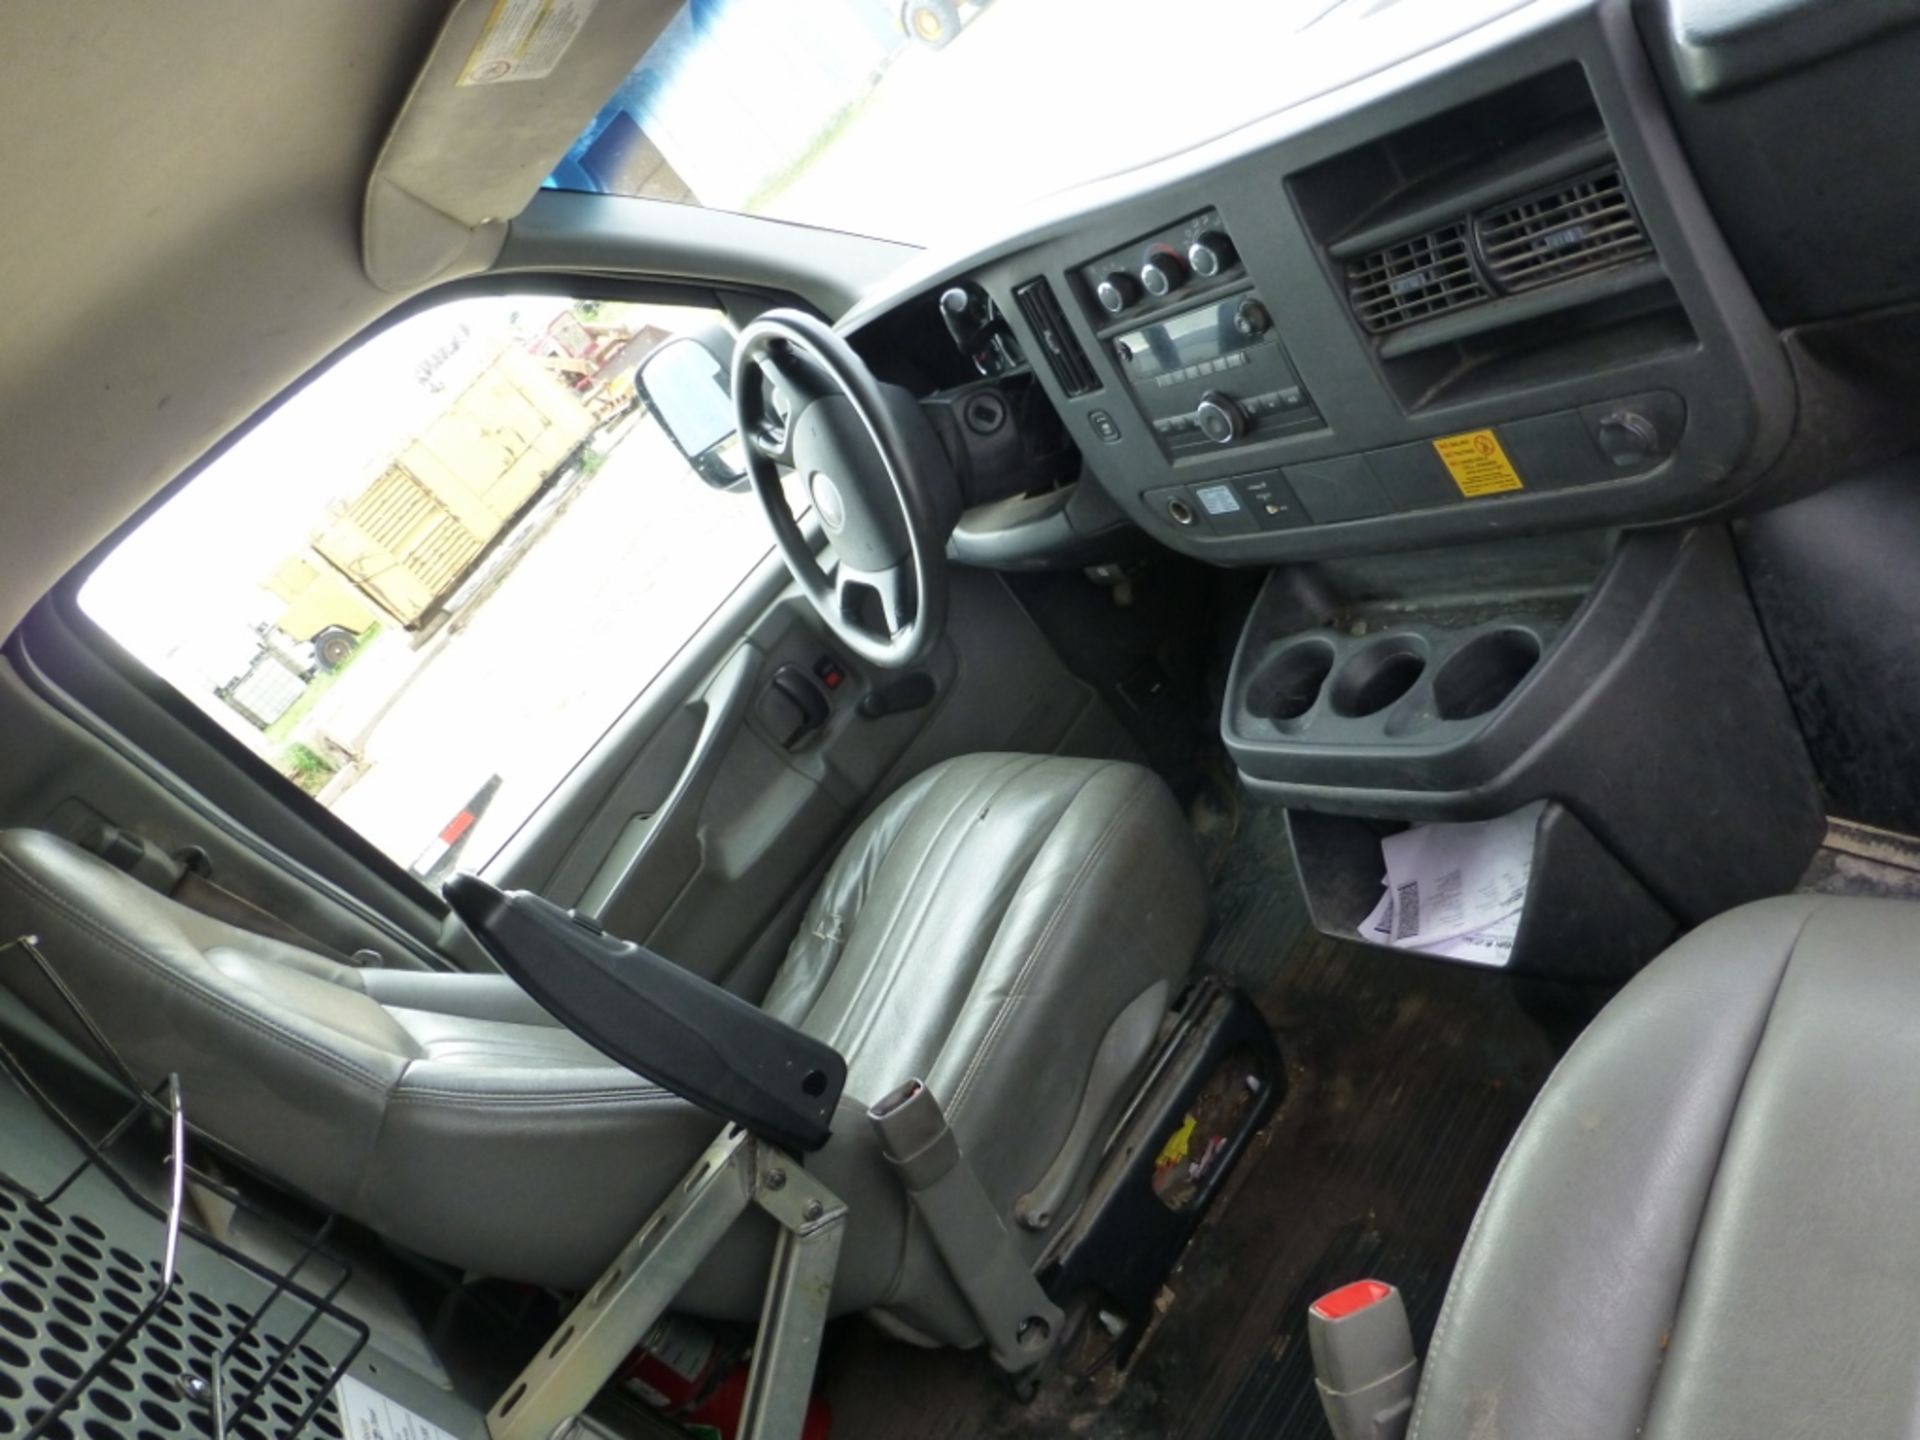 2008 GMC Cargo van, with shelf drawer units, automatic, a.c., manual windows, 254,605 unverified - Image 16 of 22